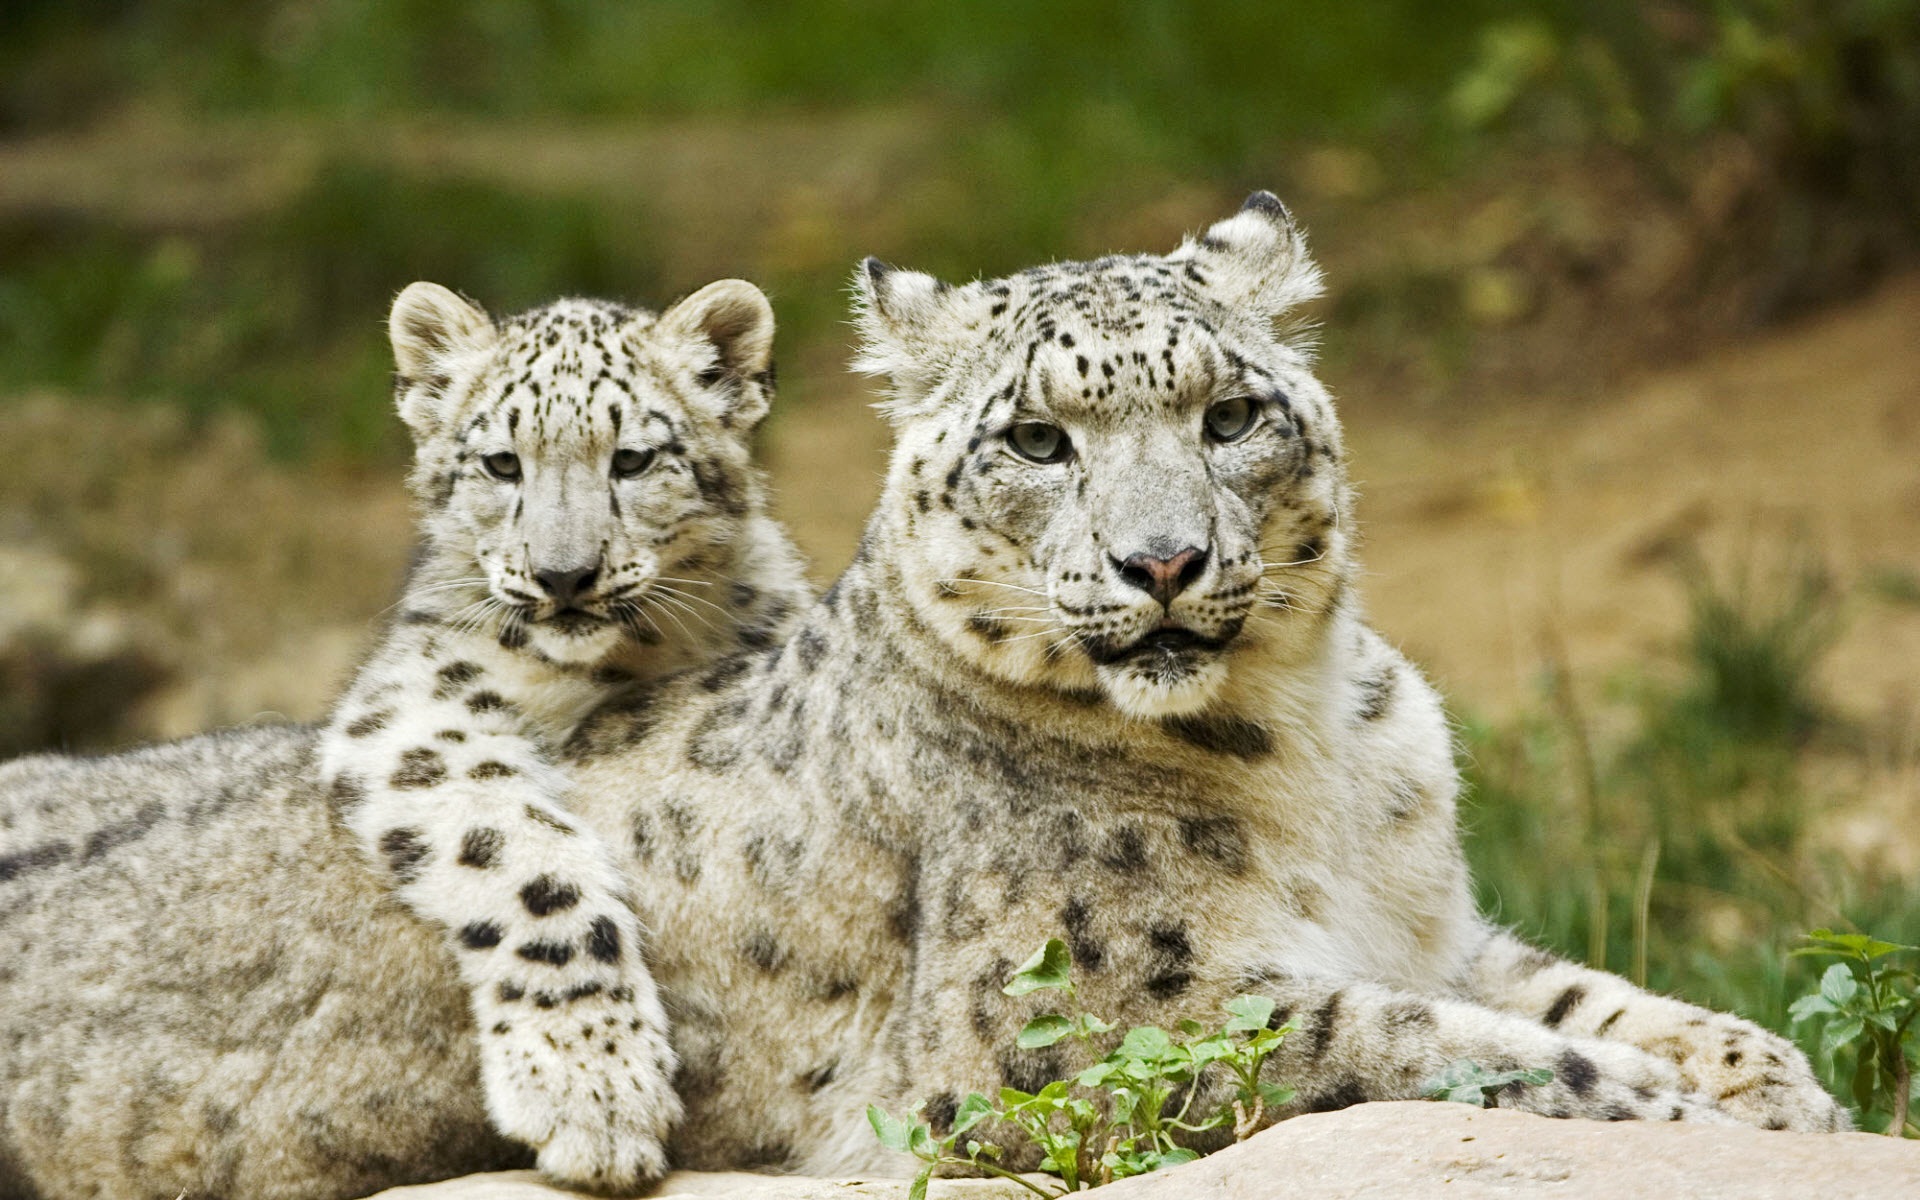 Scenery Wallpaper Includes Snow Leopard Mother And Cub